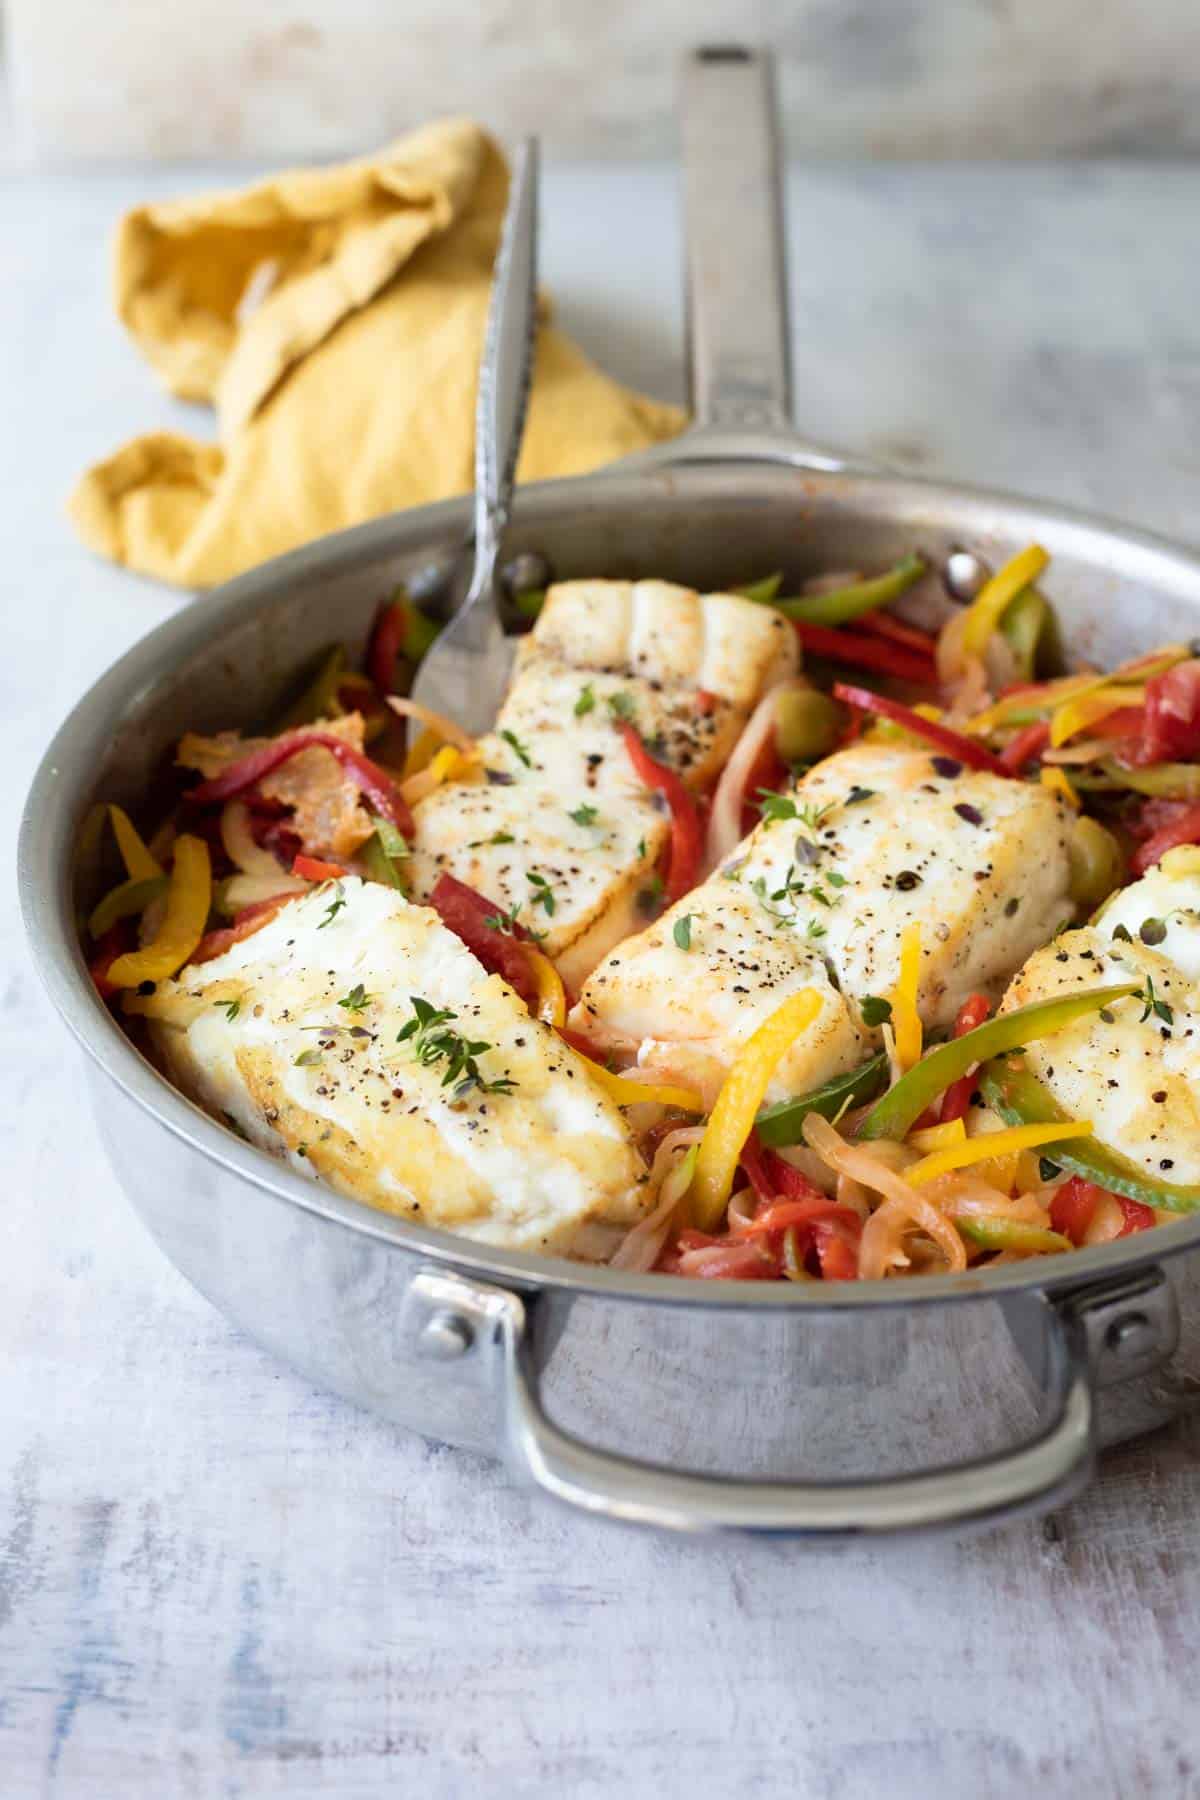 A skillet full of seared halibut, sliced bell peppers and green olives.